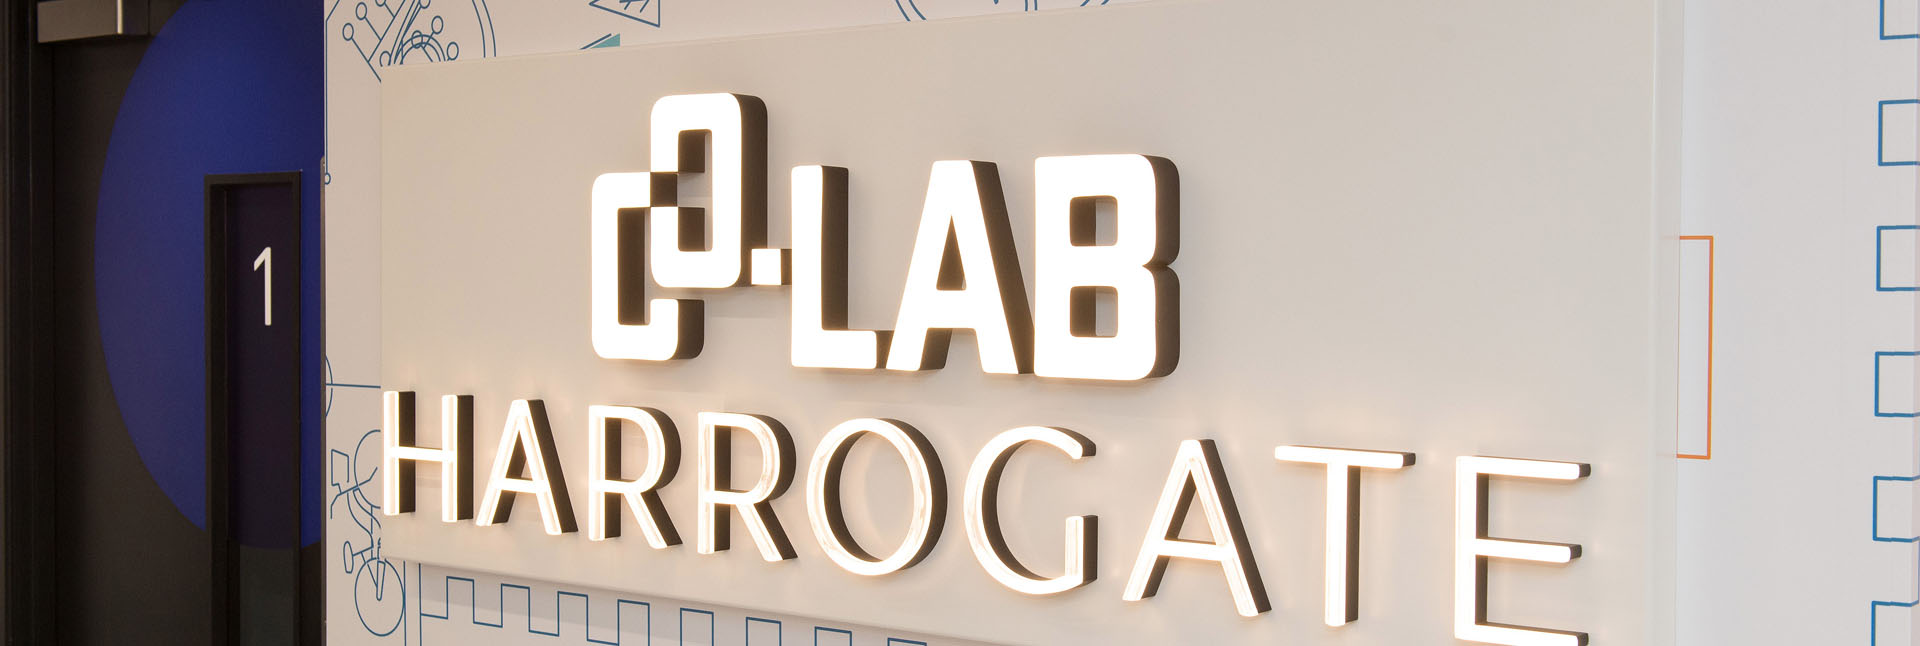 New Co-Lab workspace opens in Harrogate town centre